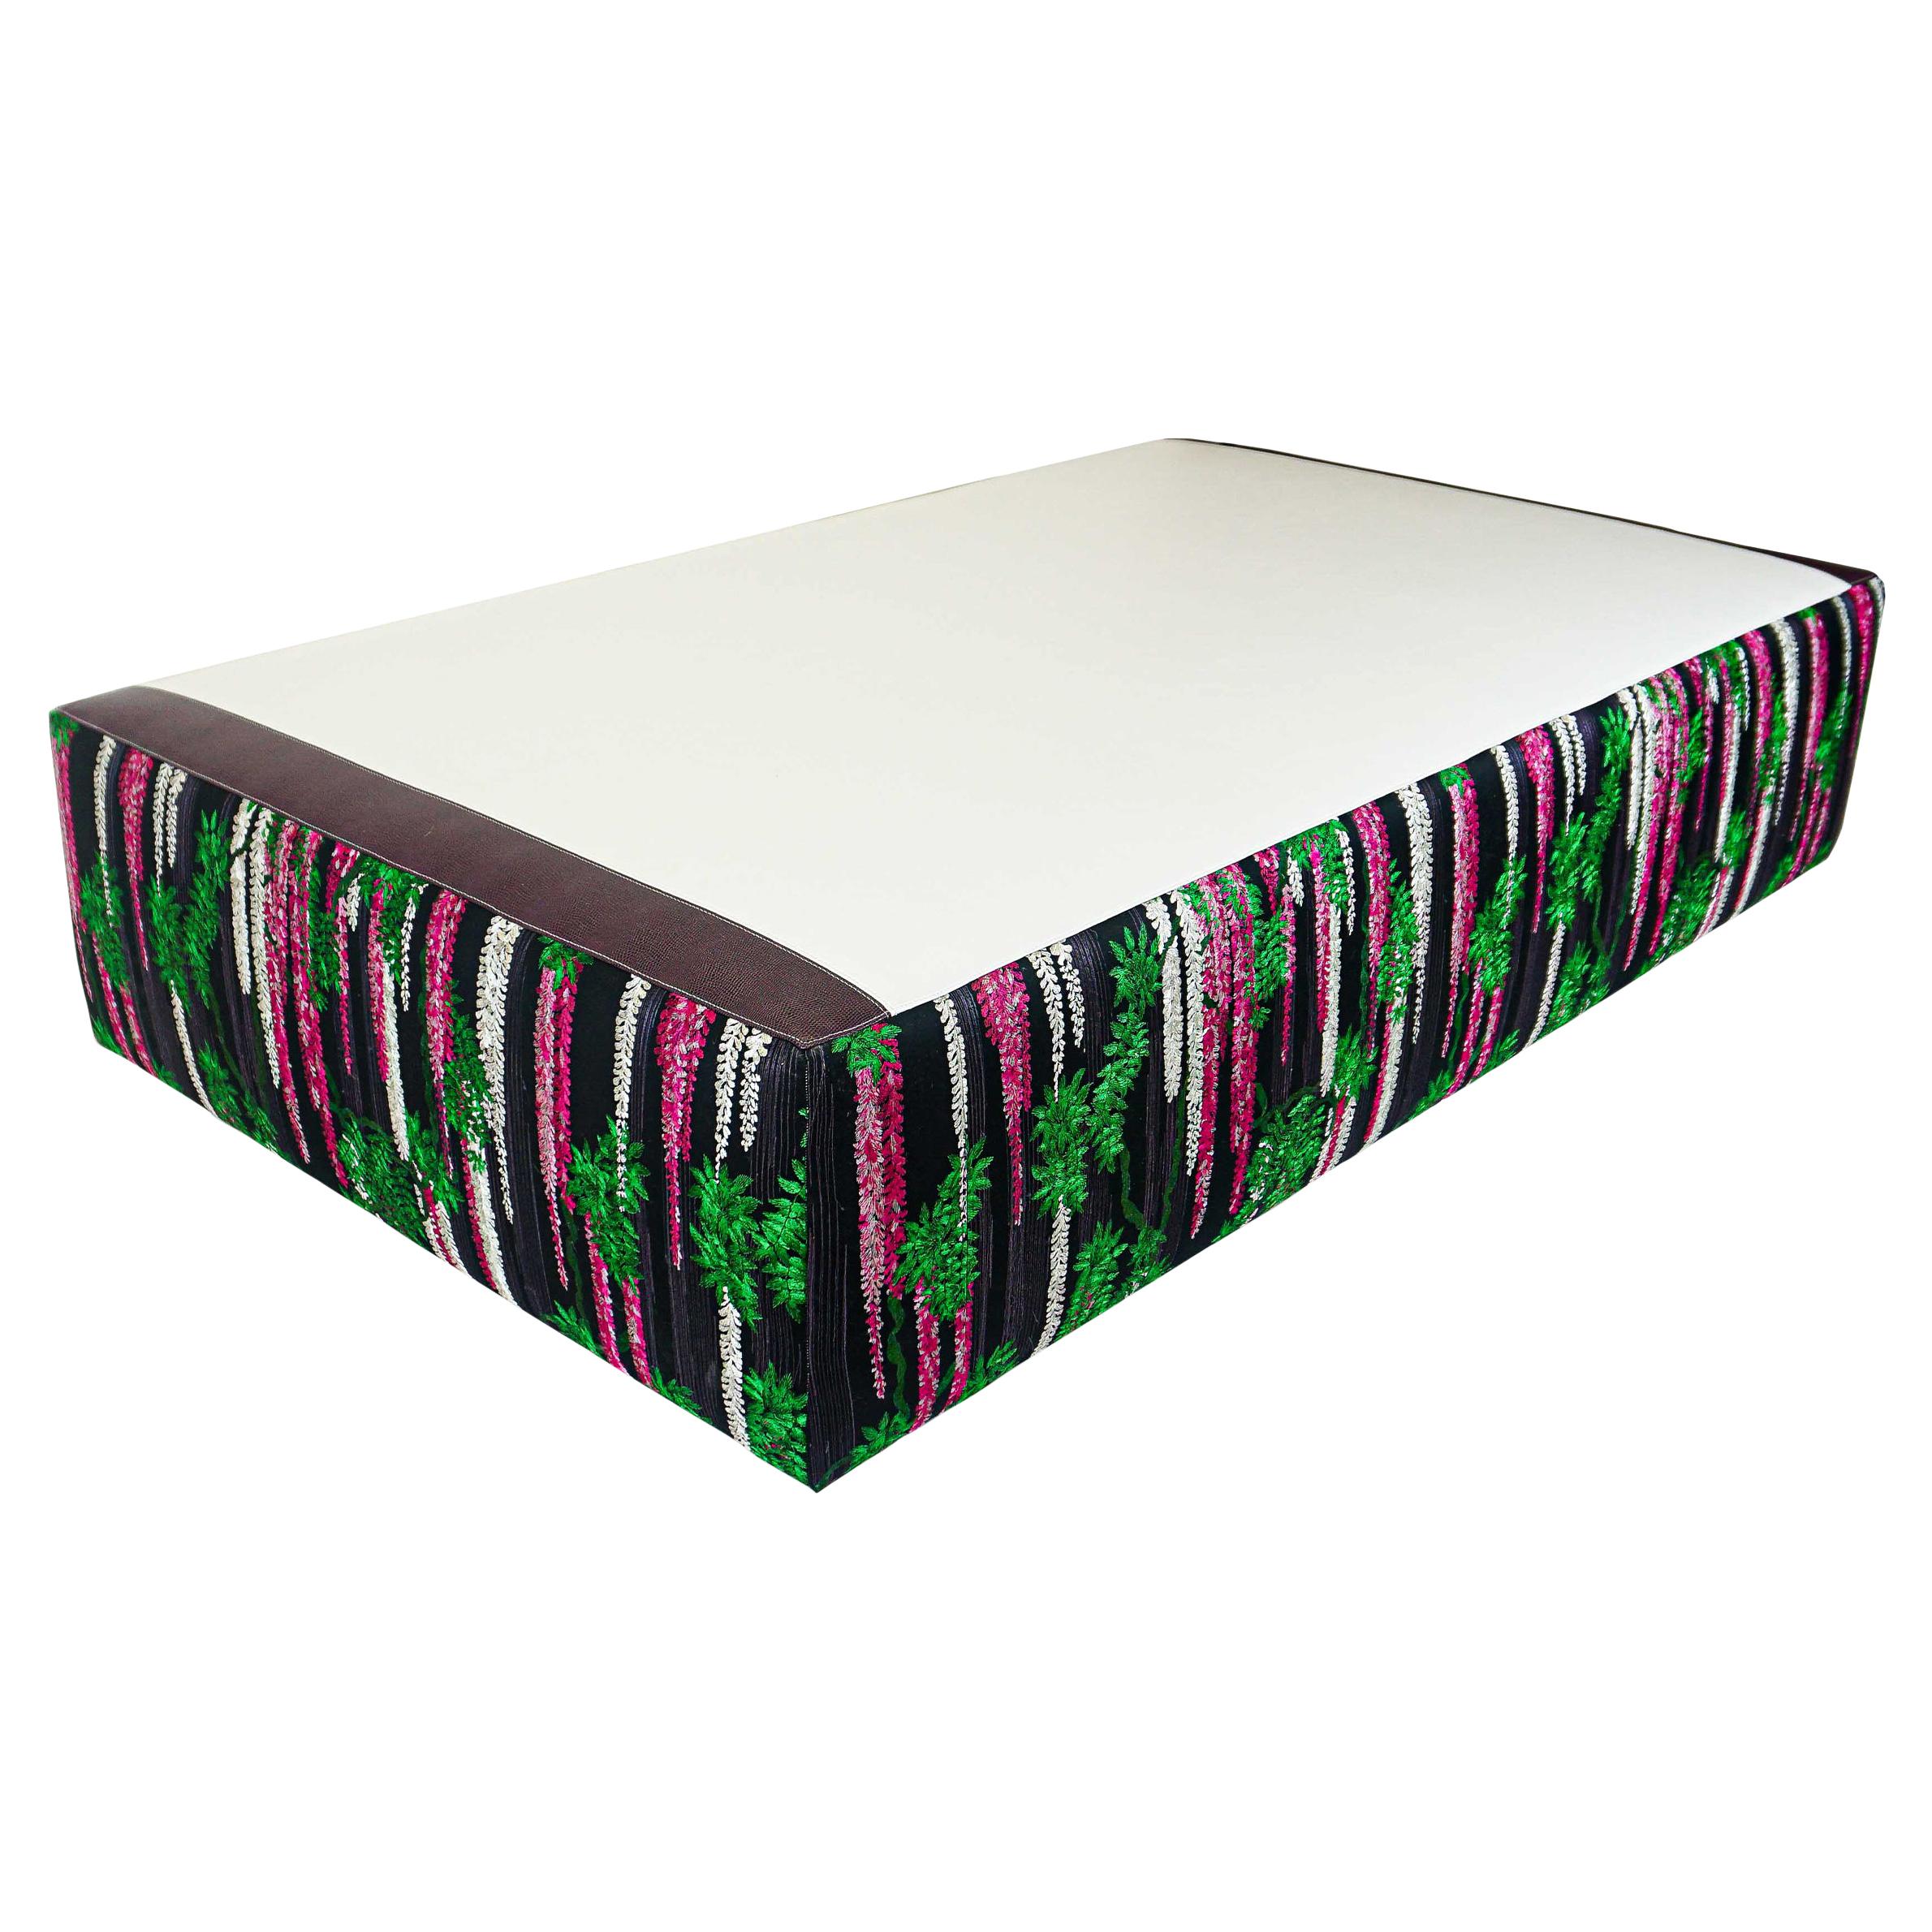 Upholstered Faux White Leather Large Ottoman with Embroidered Wisteria Cotton For Sale